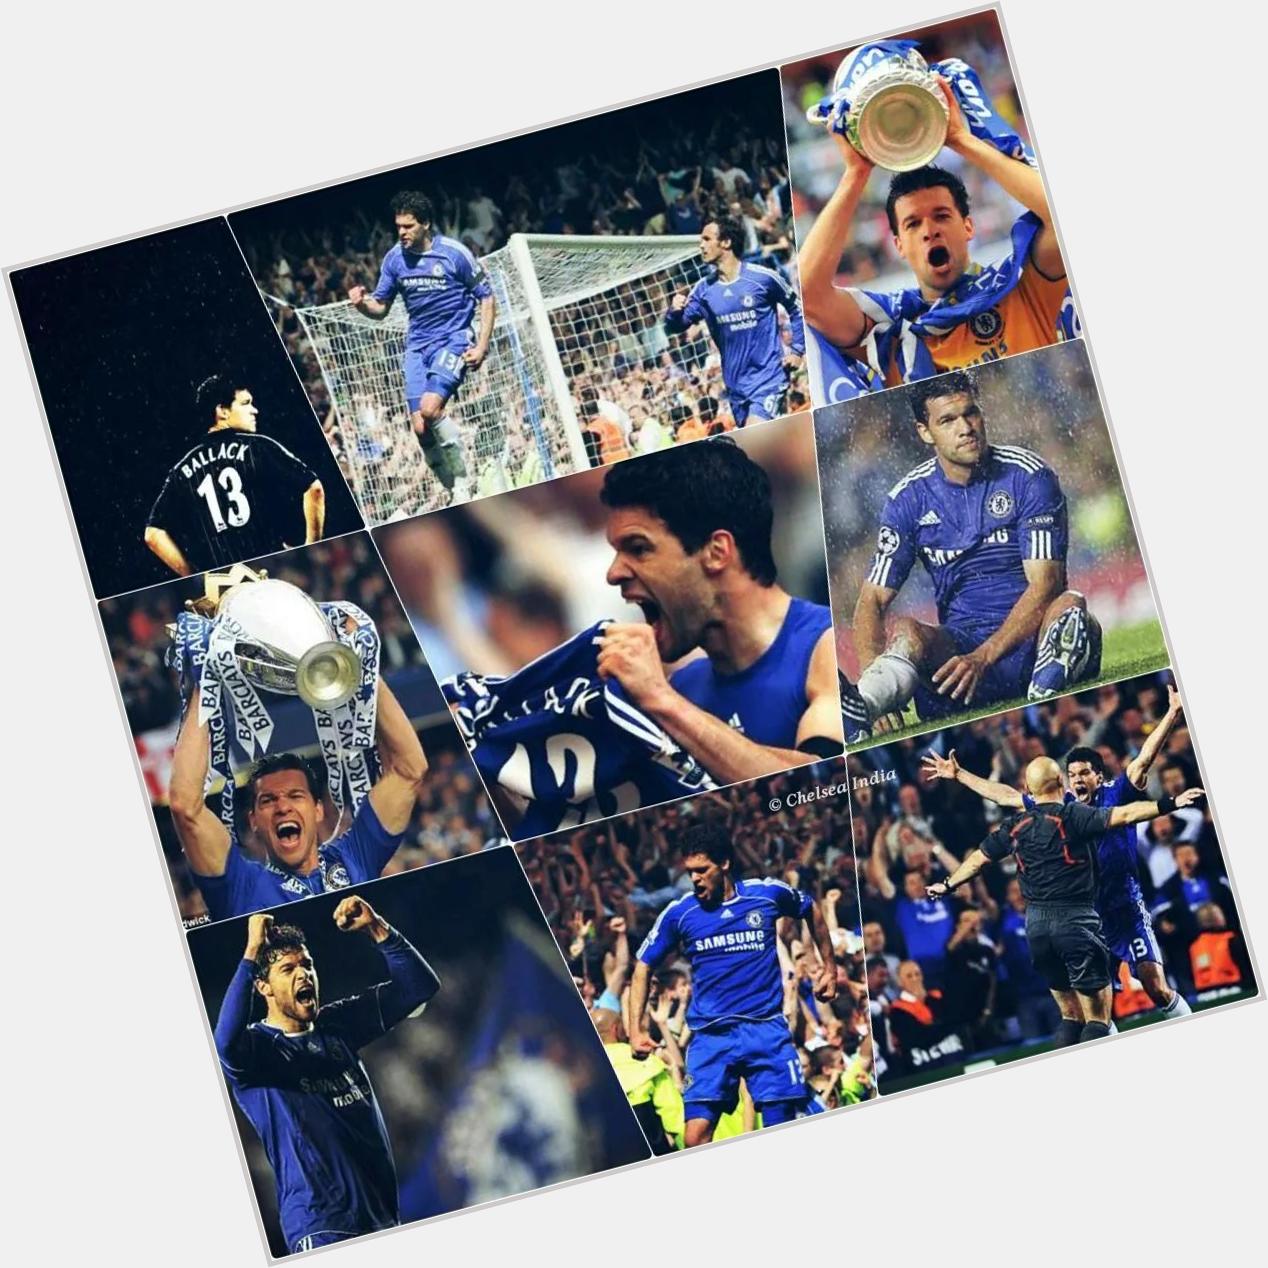 Happy 39th Bday to former Blue & the player who is idolized by many,Michael Ballack   